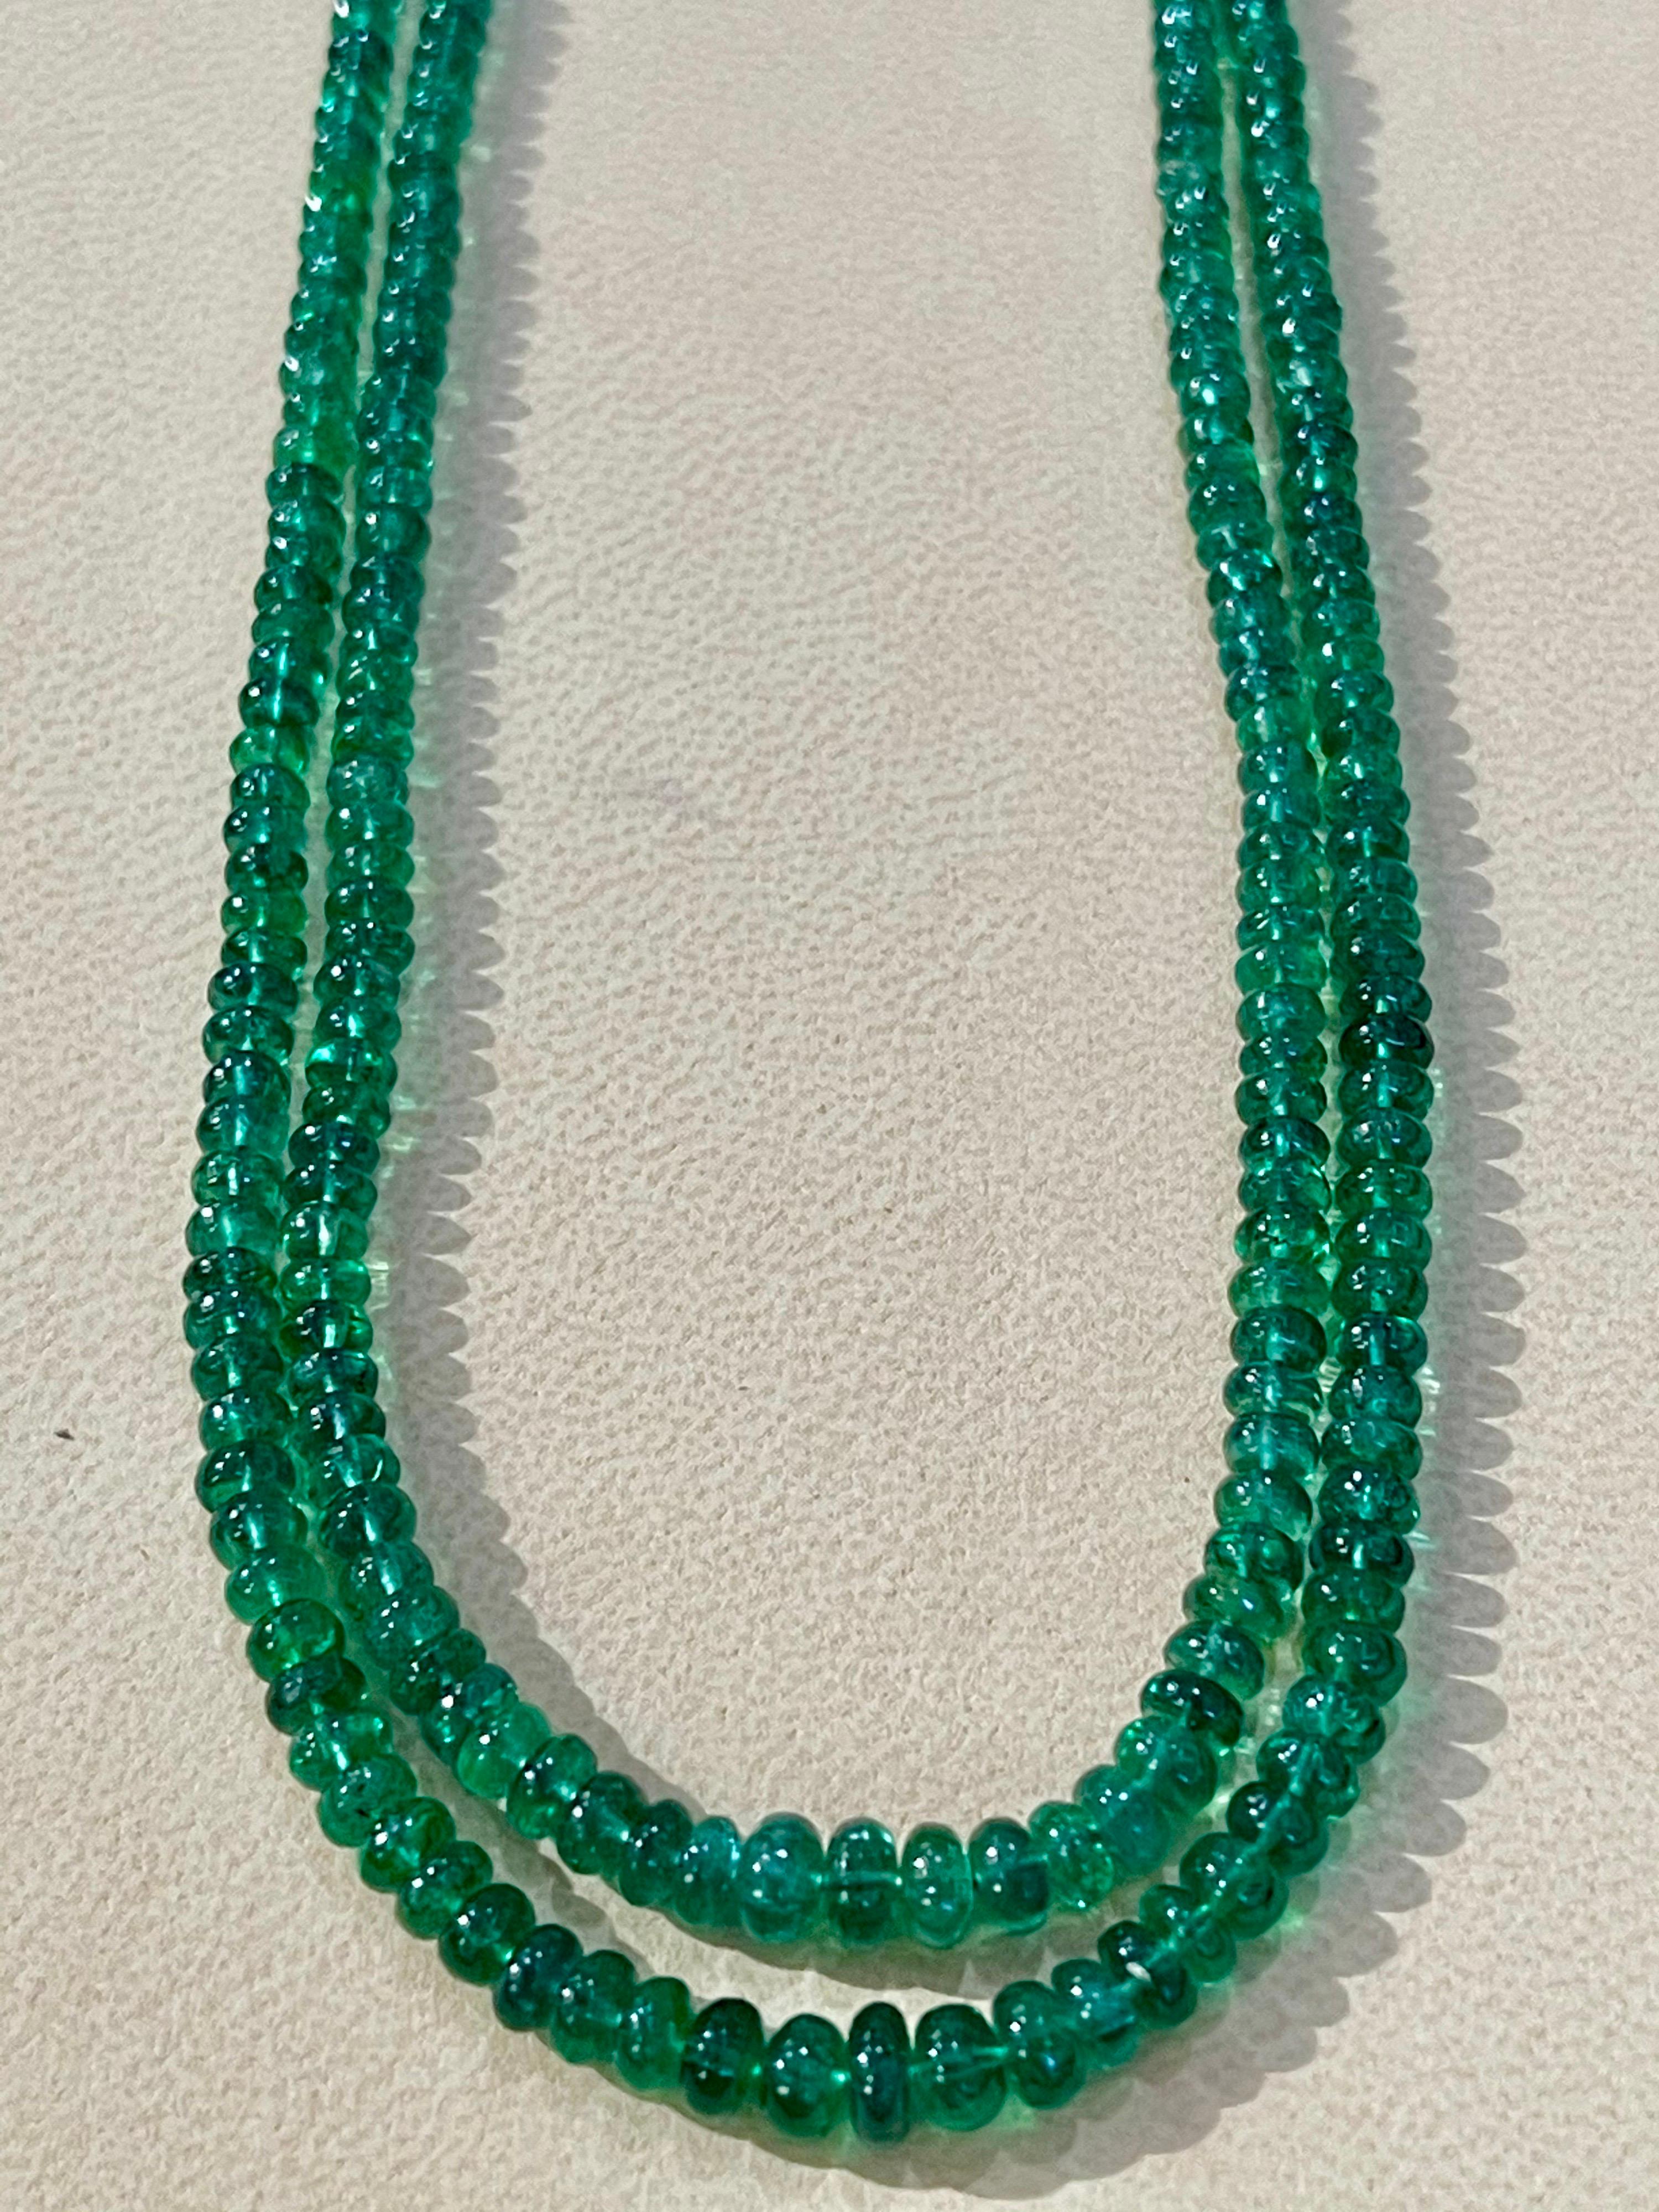 Women's 125ct Fine Emerald Beads 2 Line Necklace with 14 Kt Yellow Gold Clasp Adjustable